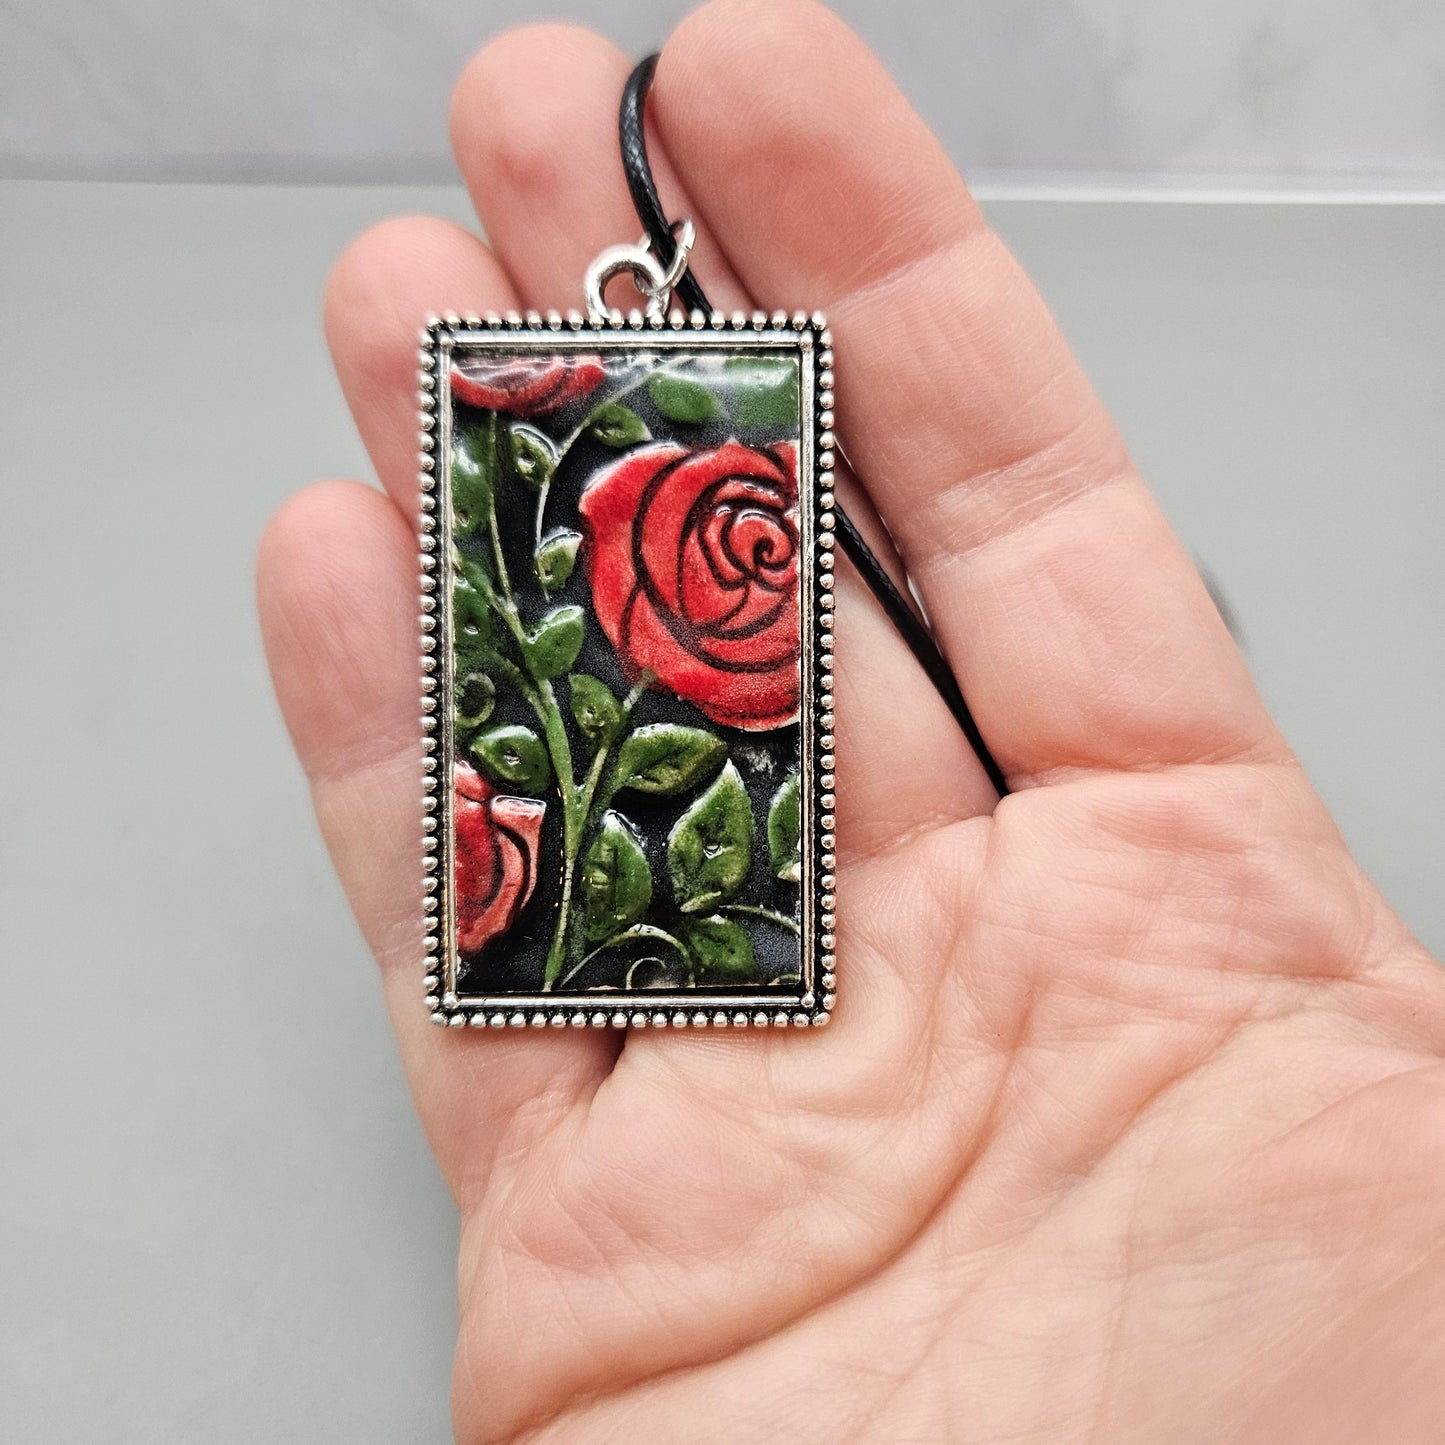 2 inch by 1 inch rectangle pendants with metal frame